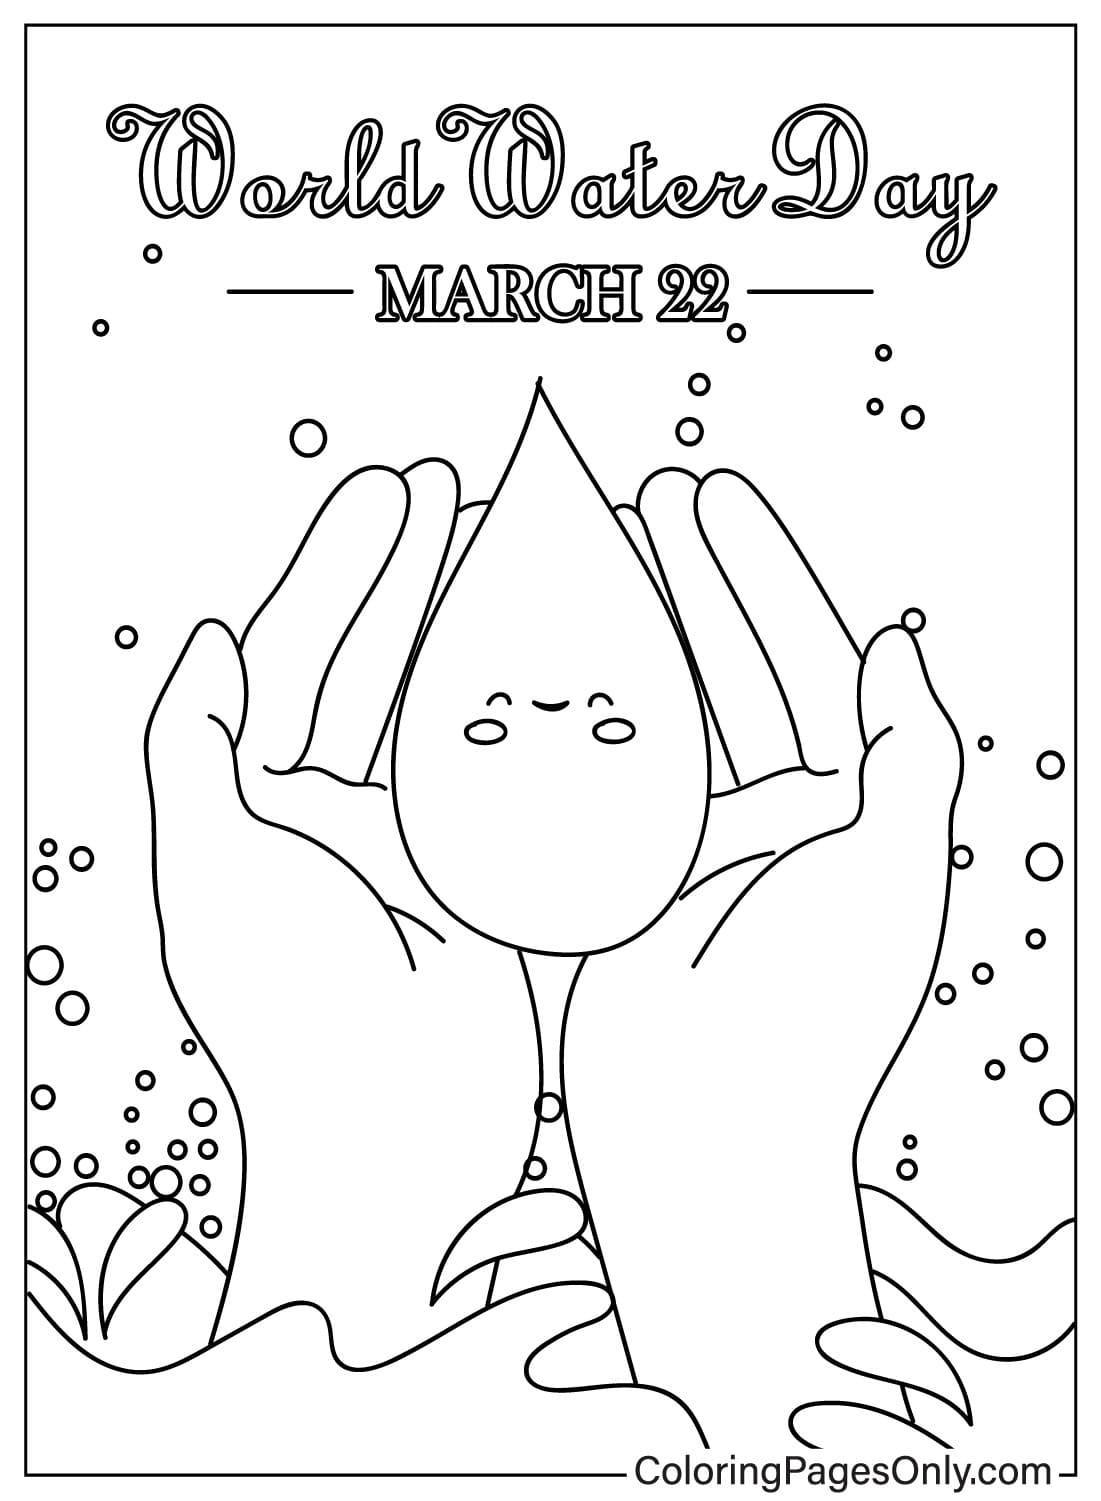 World Water Day to Color from World Water Day